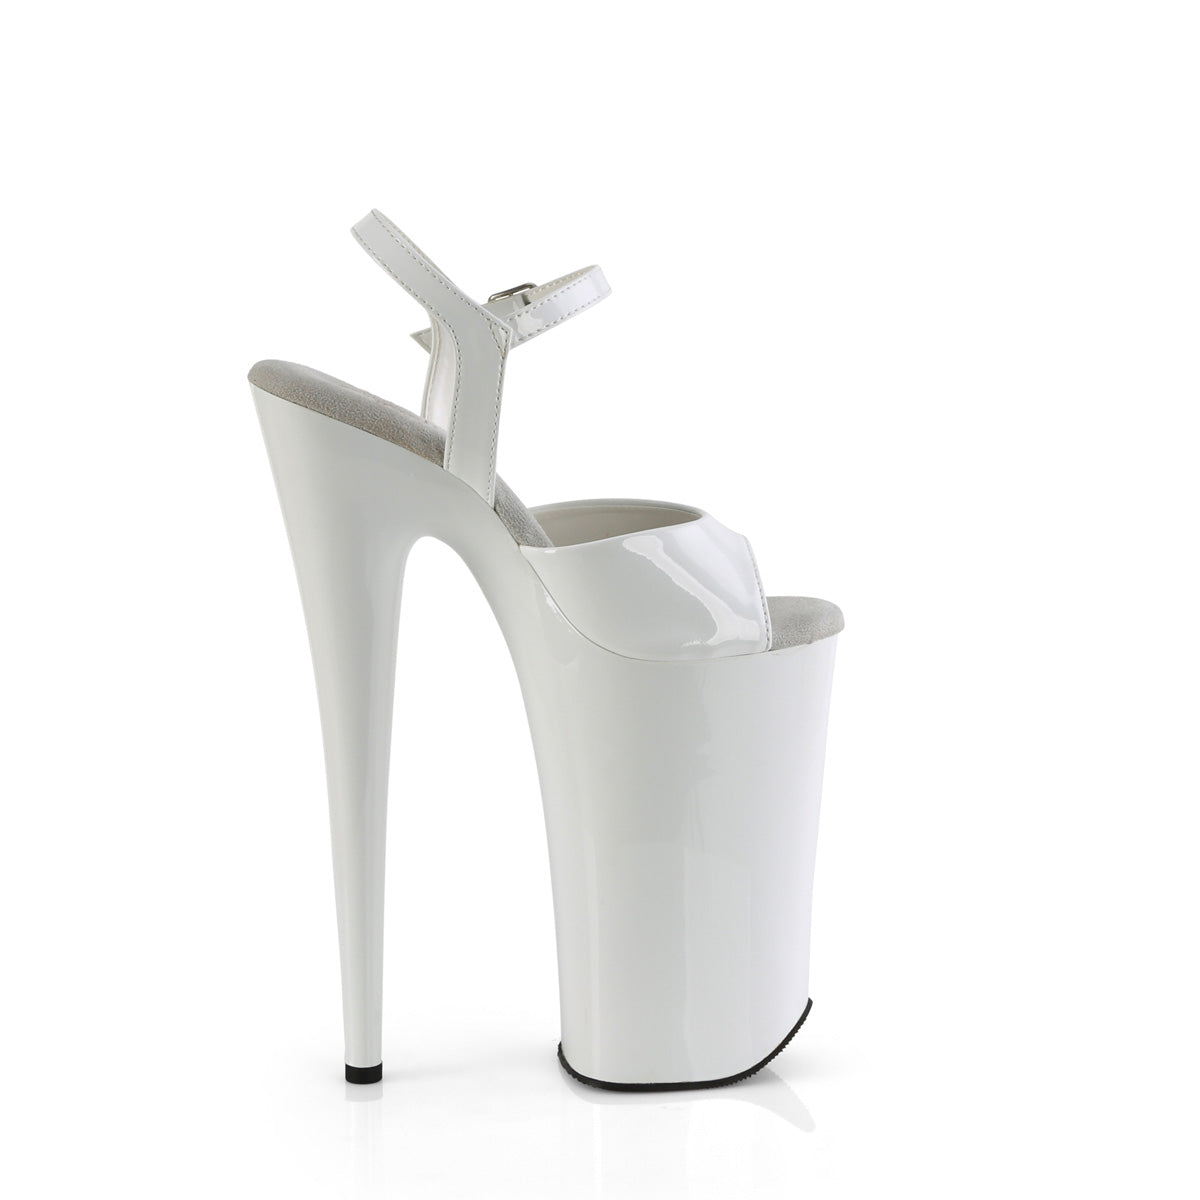 BEYOND-009 Pleaser White Patent/White Platform Shoes [Extreme High Heels]